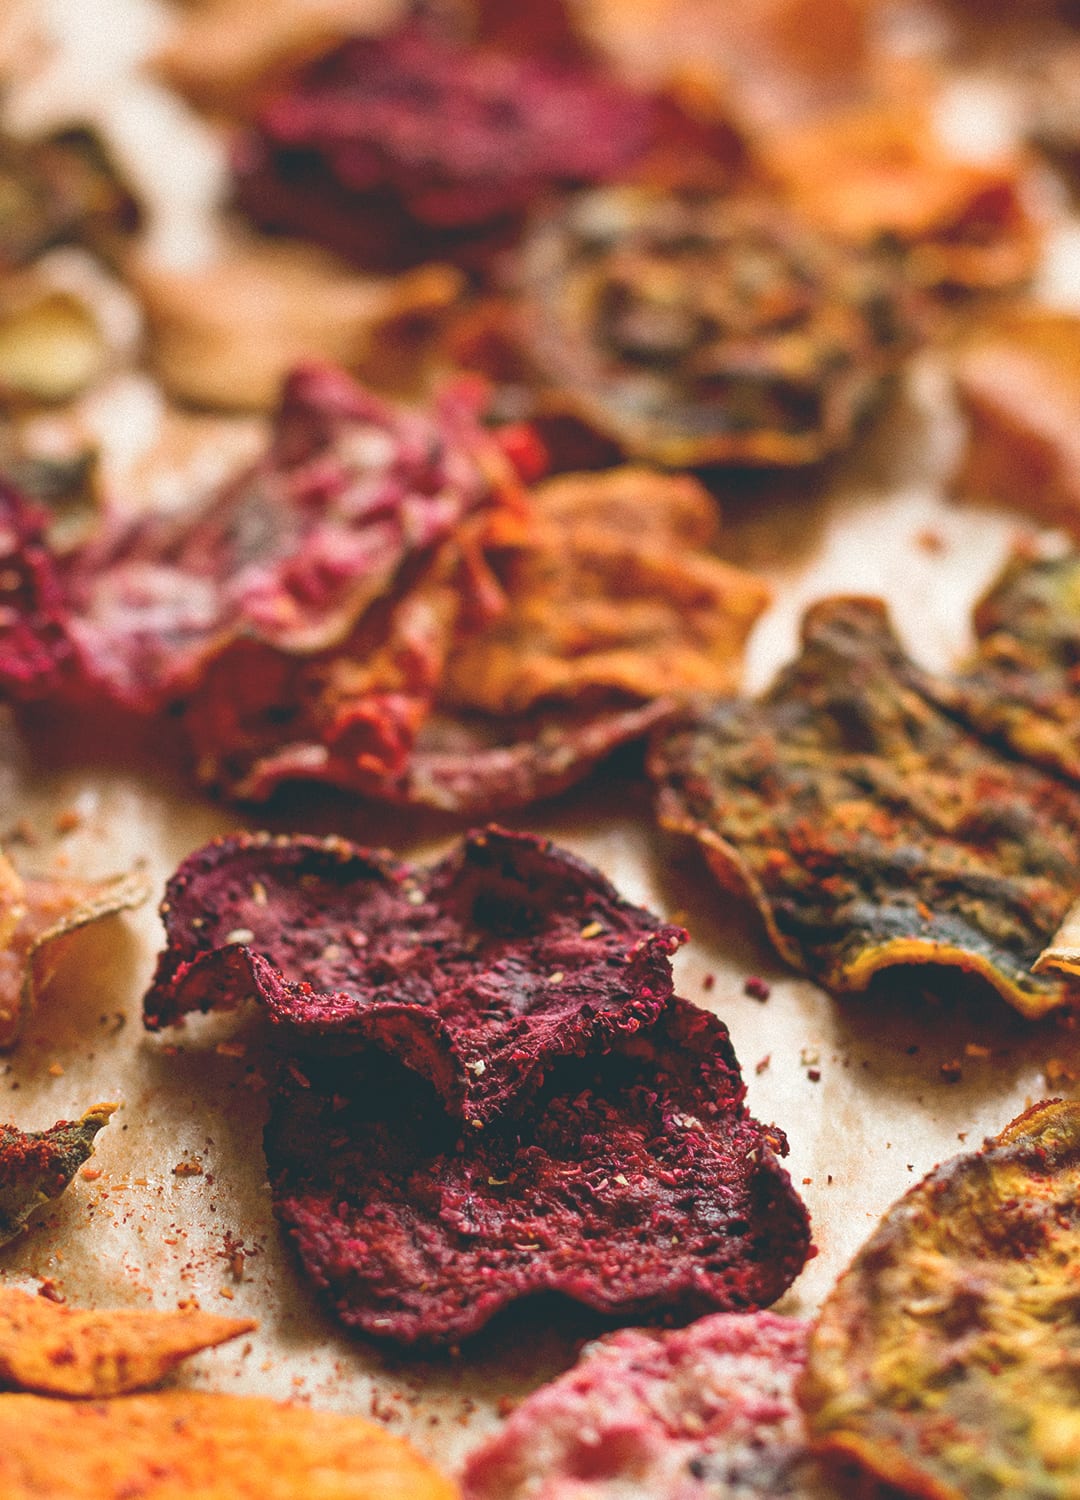 Oven Baked Veggie Chips - red, yellow, and pink beets, sweet potatoes, and some regular potatoes is all you need! Plus your favorite seasoning. You'll absolutely love these. Crunchy & delicious. | thehealthfulideas.com